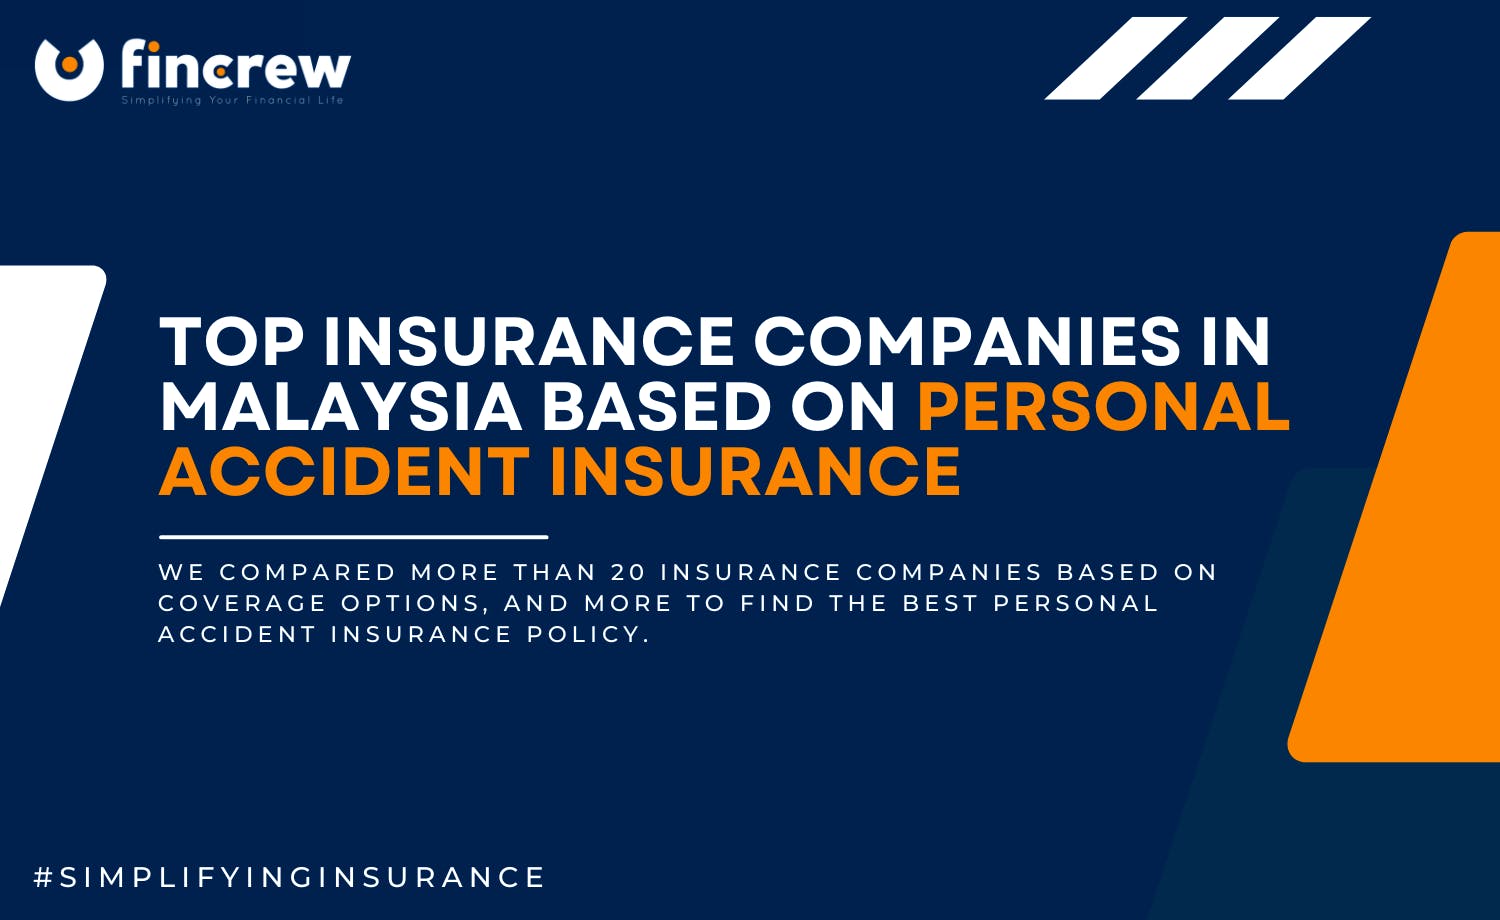 Top Personal Accident Insurance Companies In Malaysia